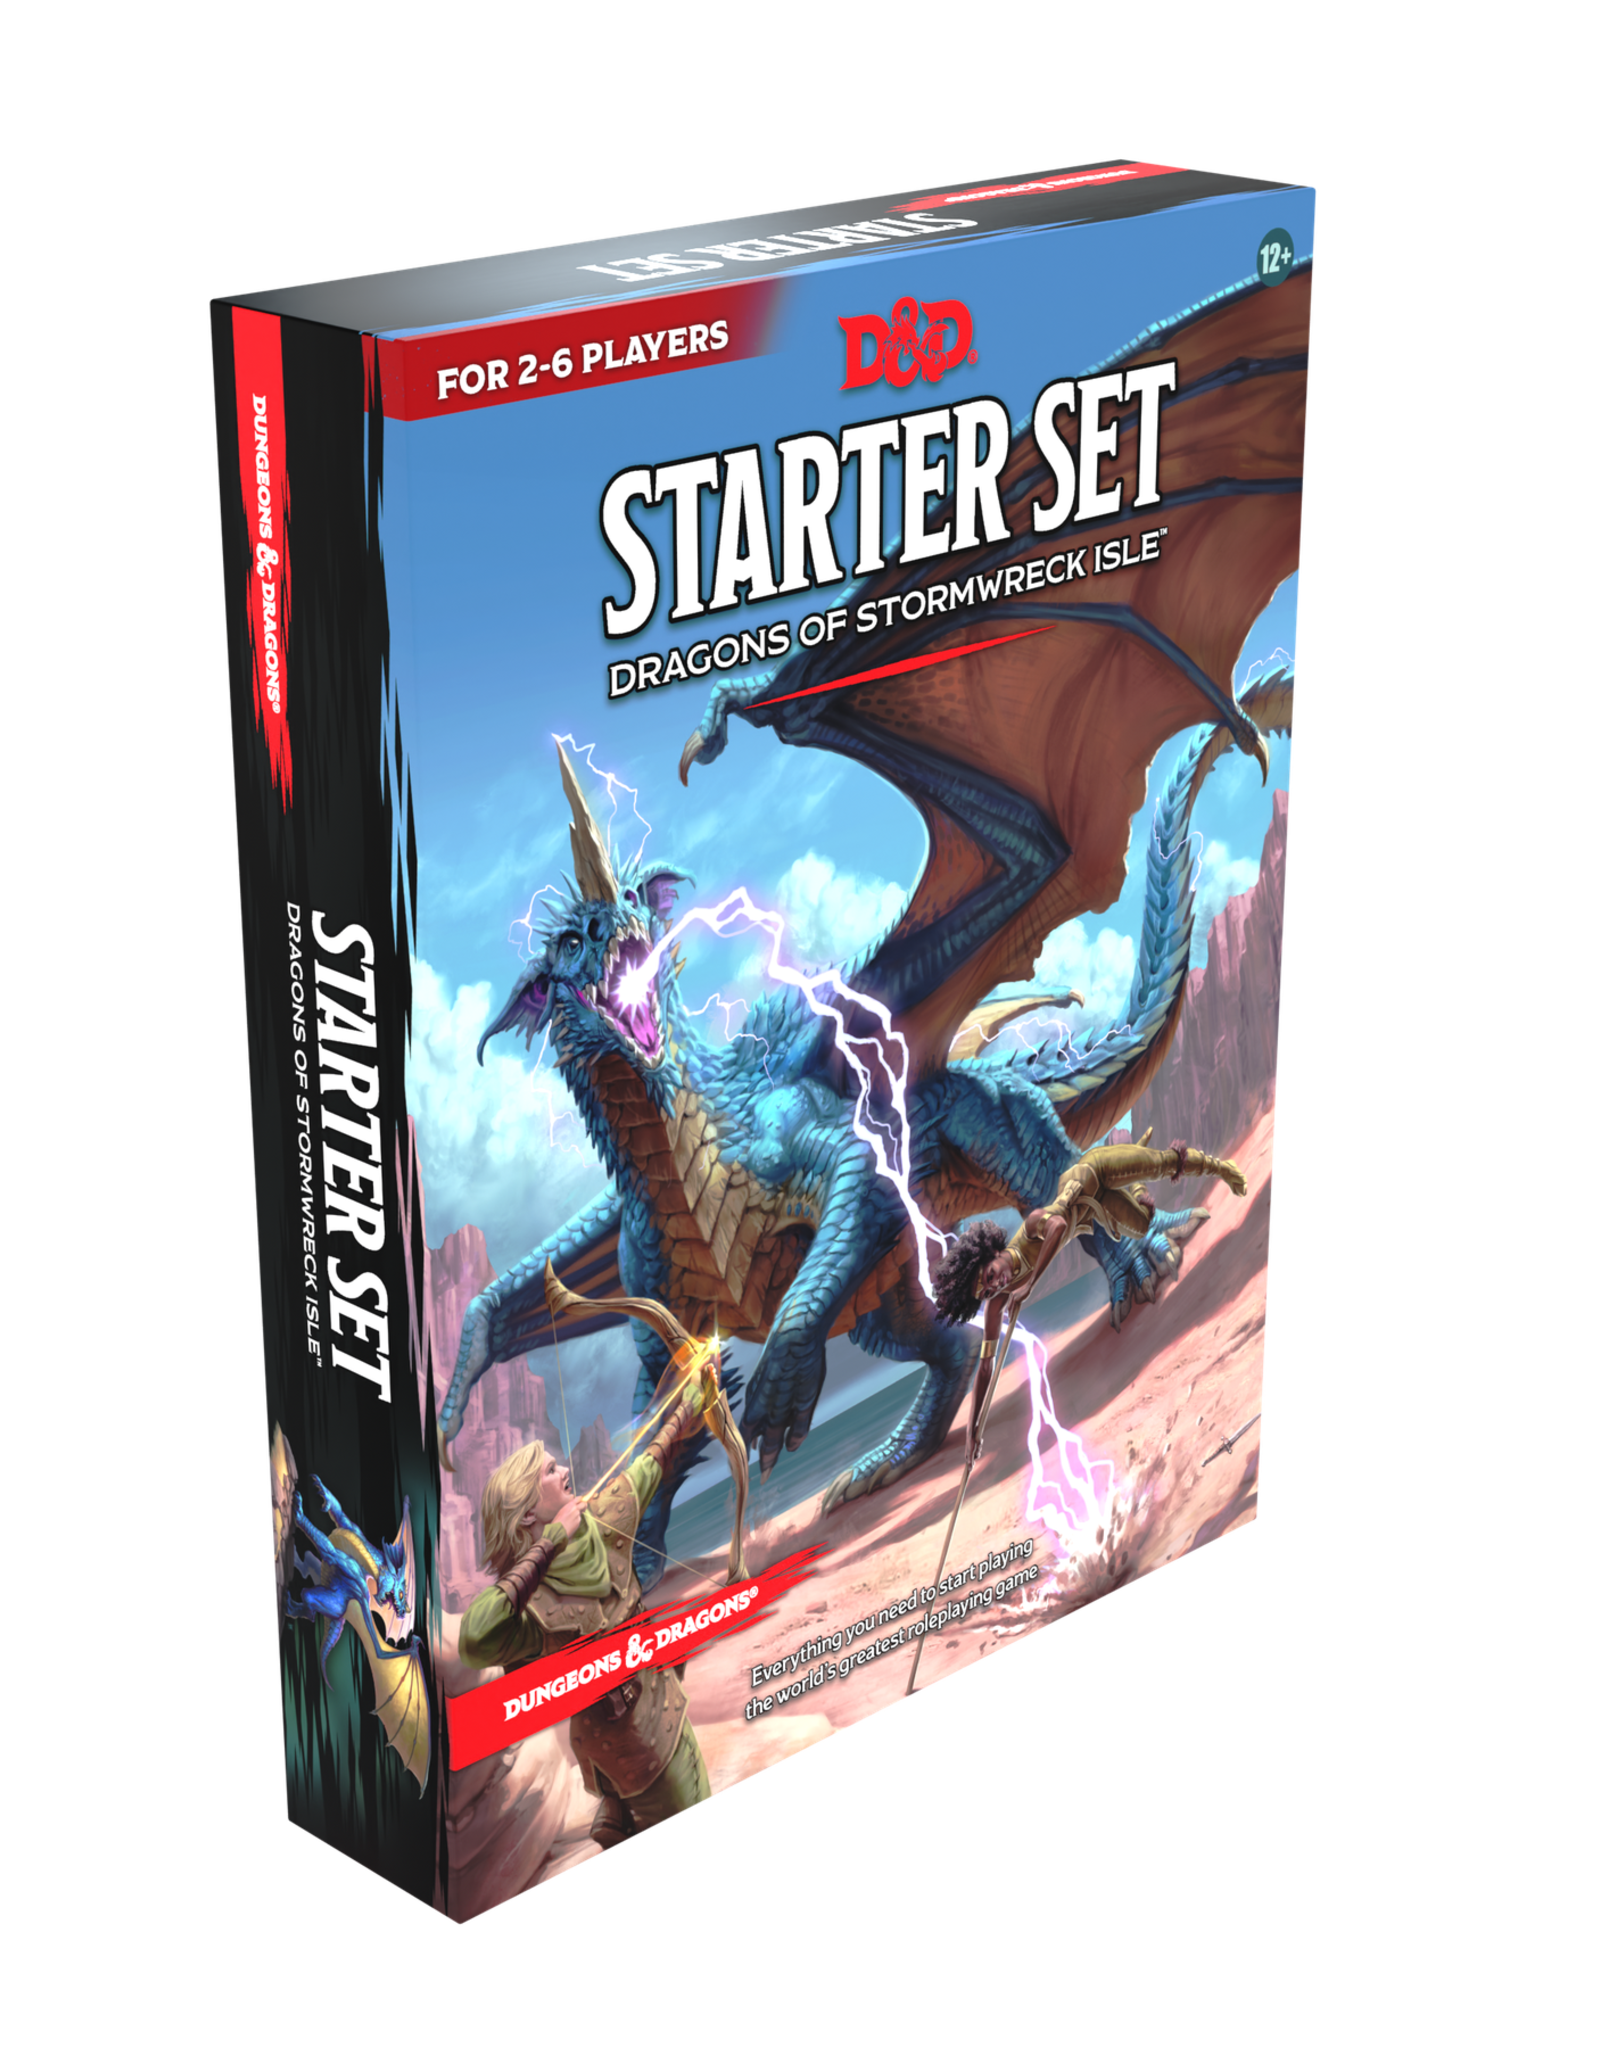 Wizards of the Coast DND Starter Set Dragons of Stormwreck Isle